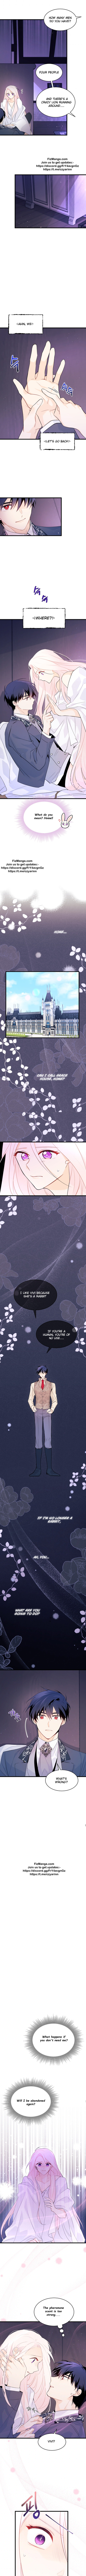 A Symbiotic Relationship Between A Rabbit And A Black Panther - Chapter 37.5 Page 2